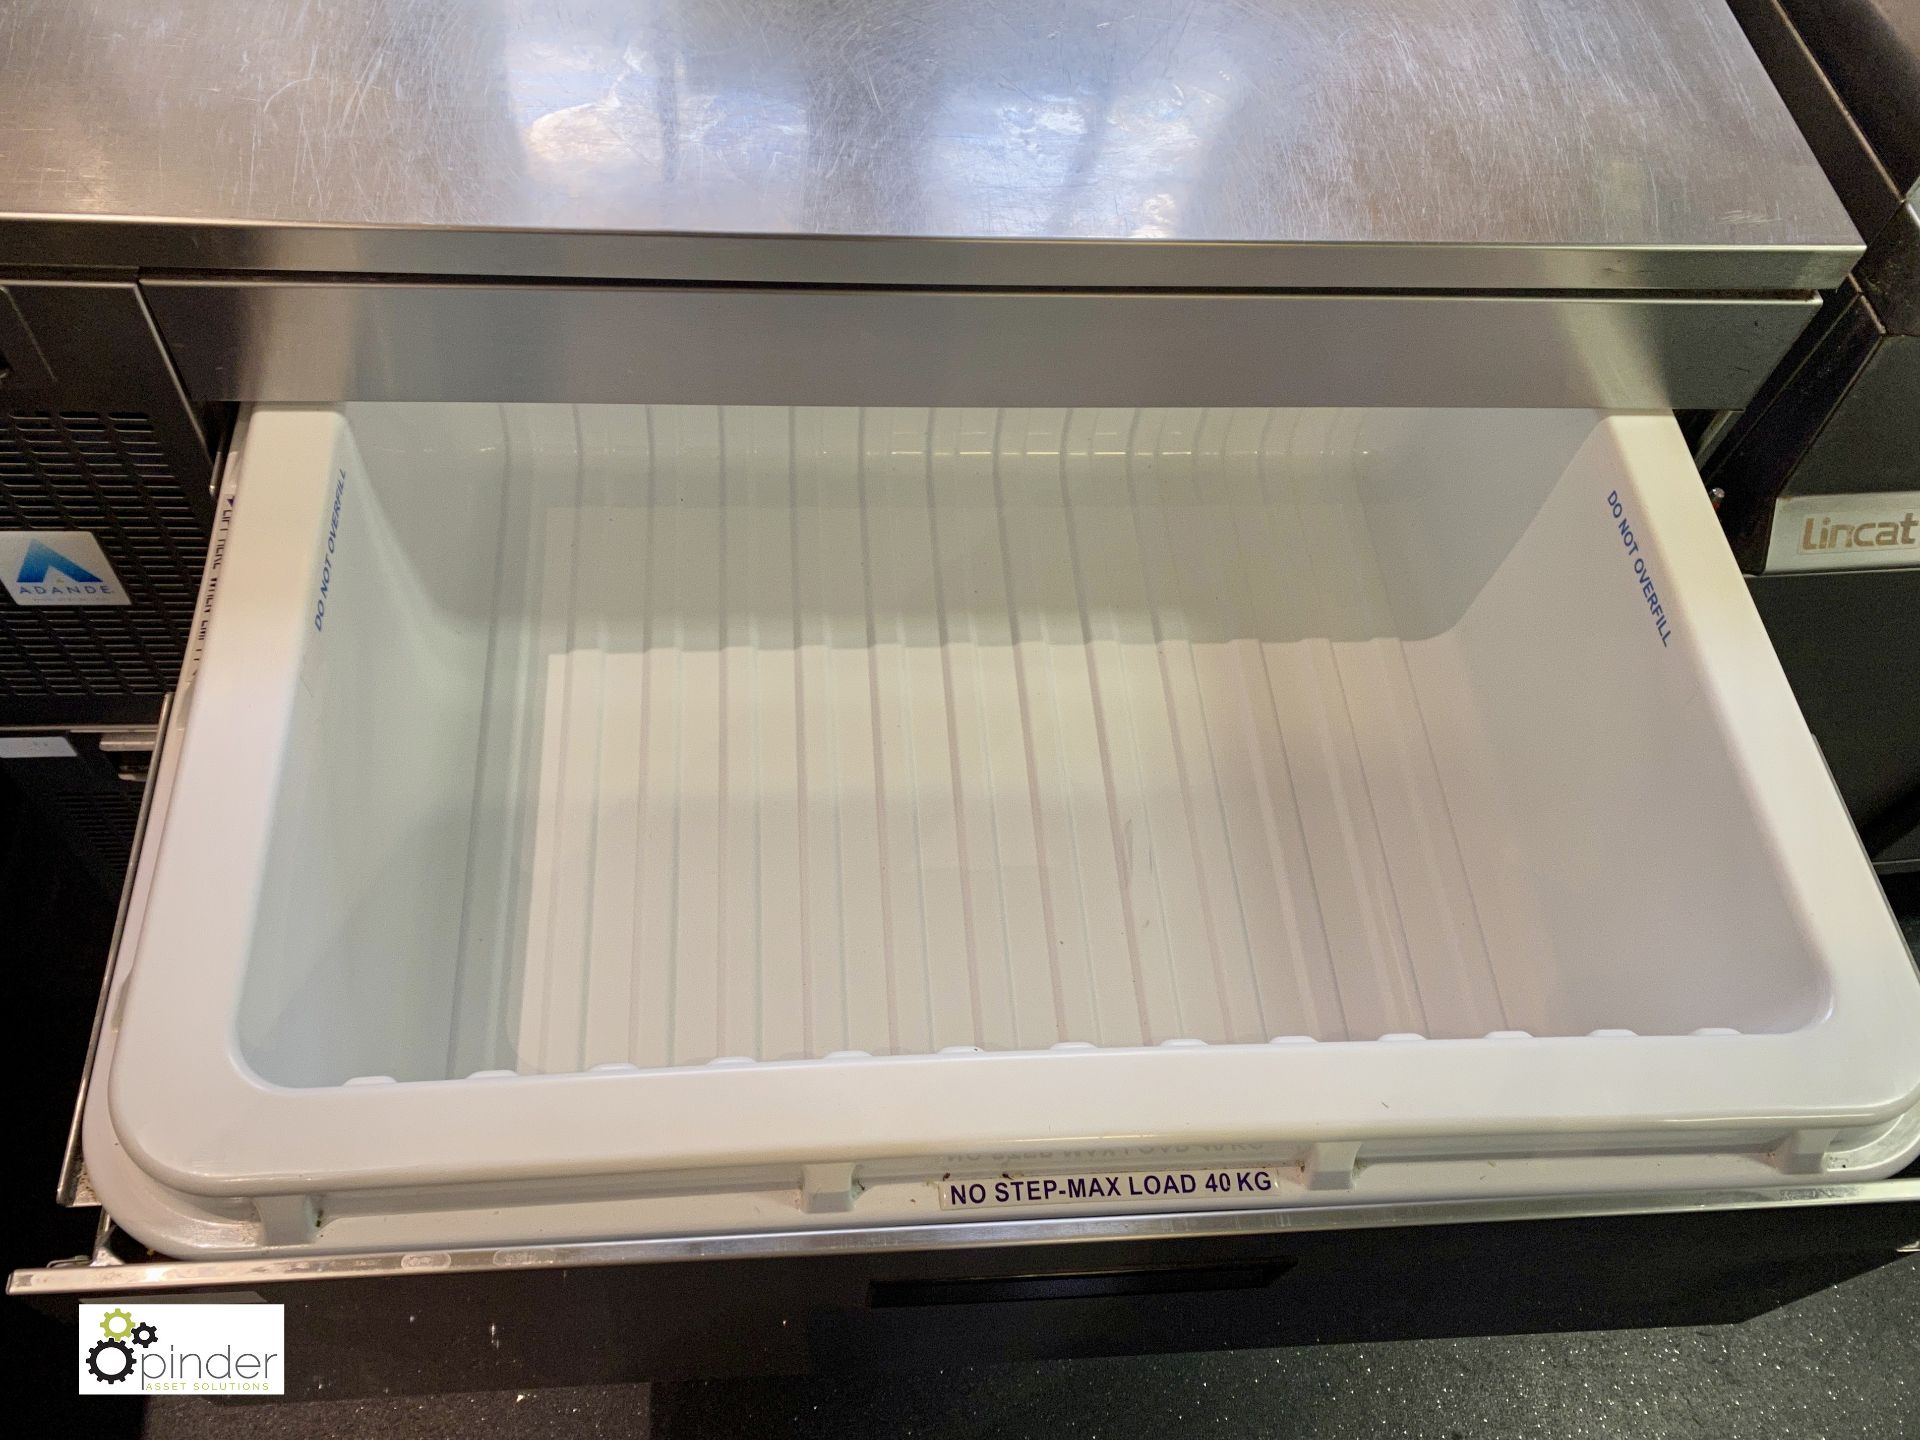 Adande mobile stainless steel 2-drawer Freezer, 1100mm x 710mm x 900mm, 240volts - Image 4 of 6